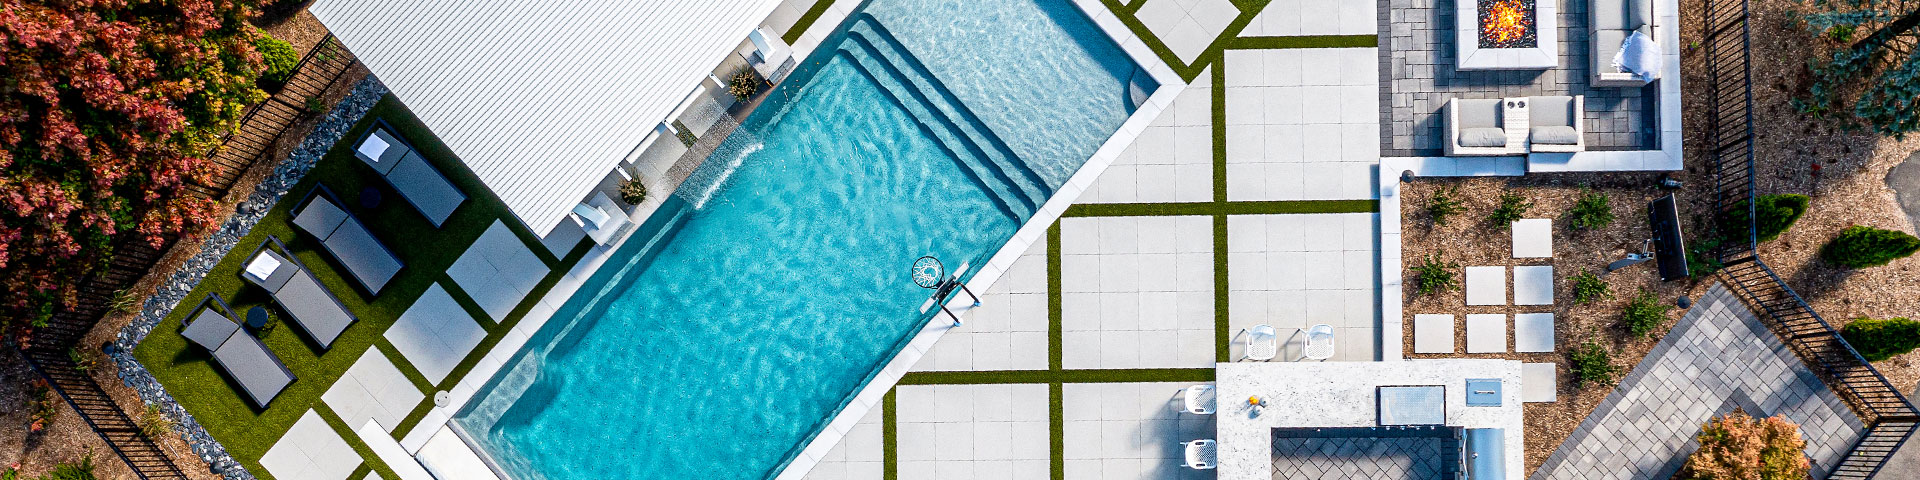 An aerial view of a swimming pool surrounded by patio pavers.